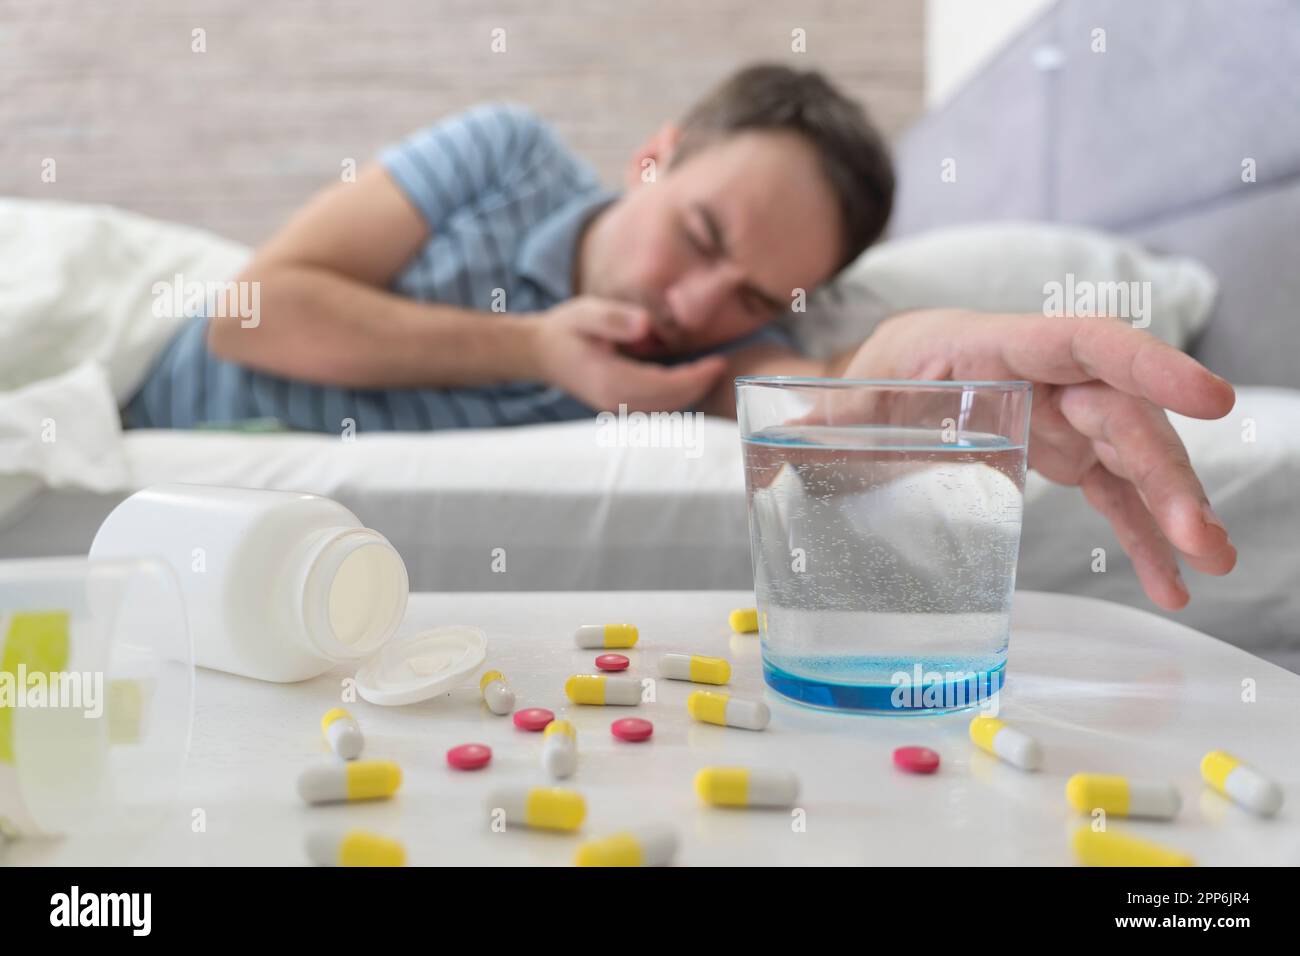 Hangover. Man take Pill and Water. Man in Bed Morning Headache. Man Using Aspirin. Glass of Water Close Up. symptom is food poisoning. Stock Photo